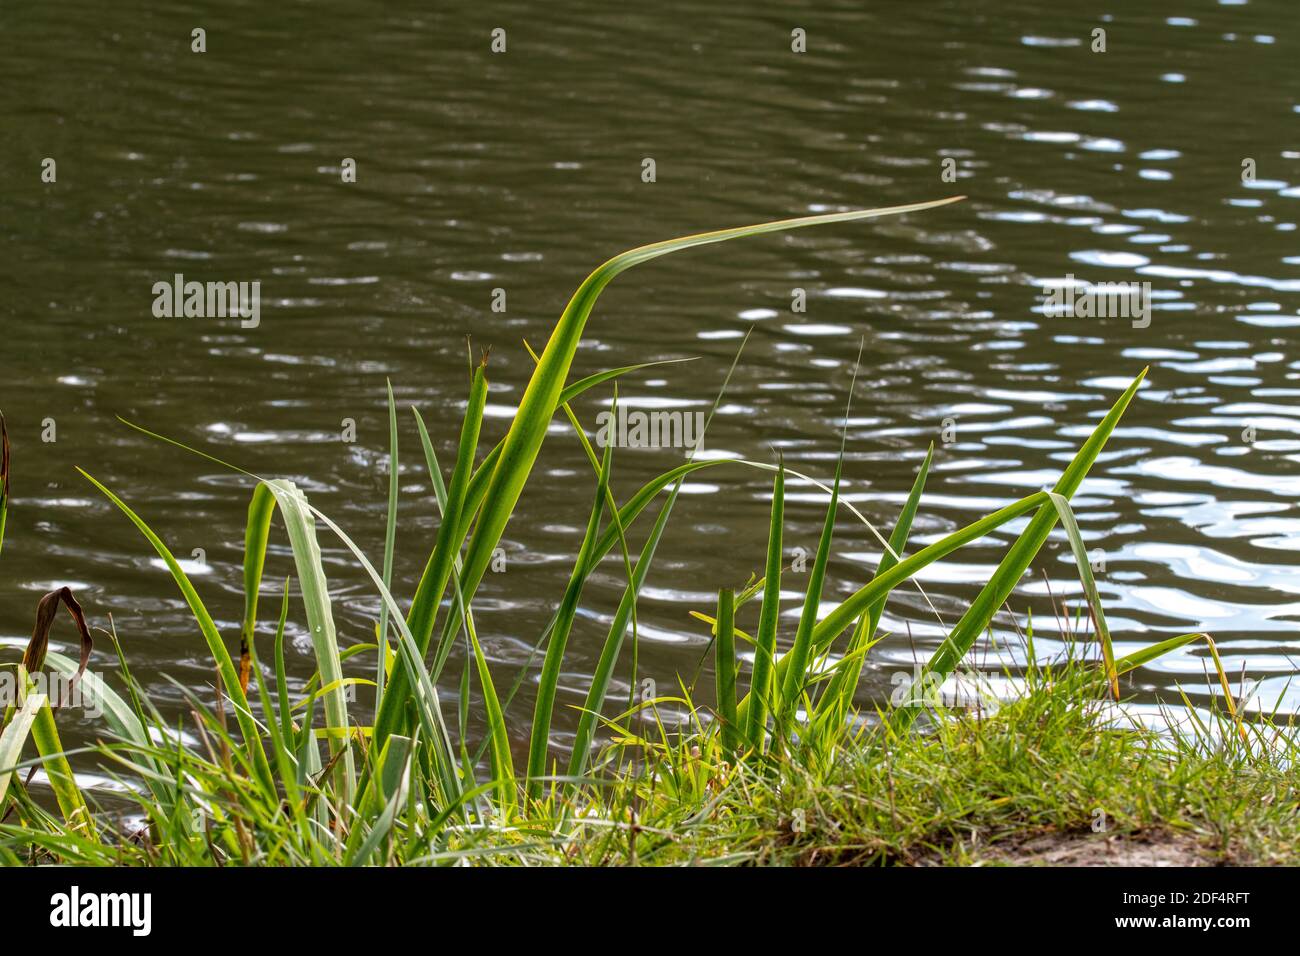 Blades of grass in the backlight on the bank of a lake. Stock Photo